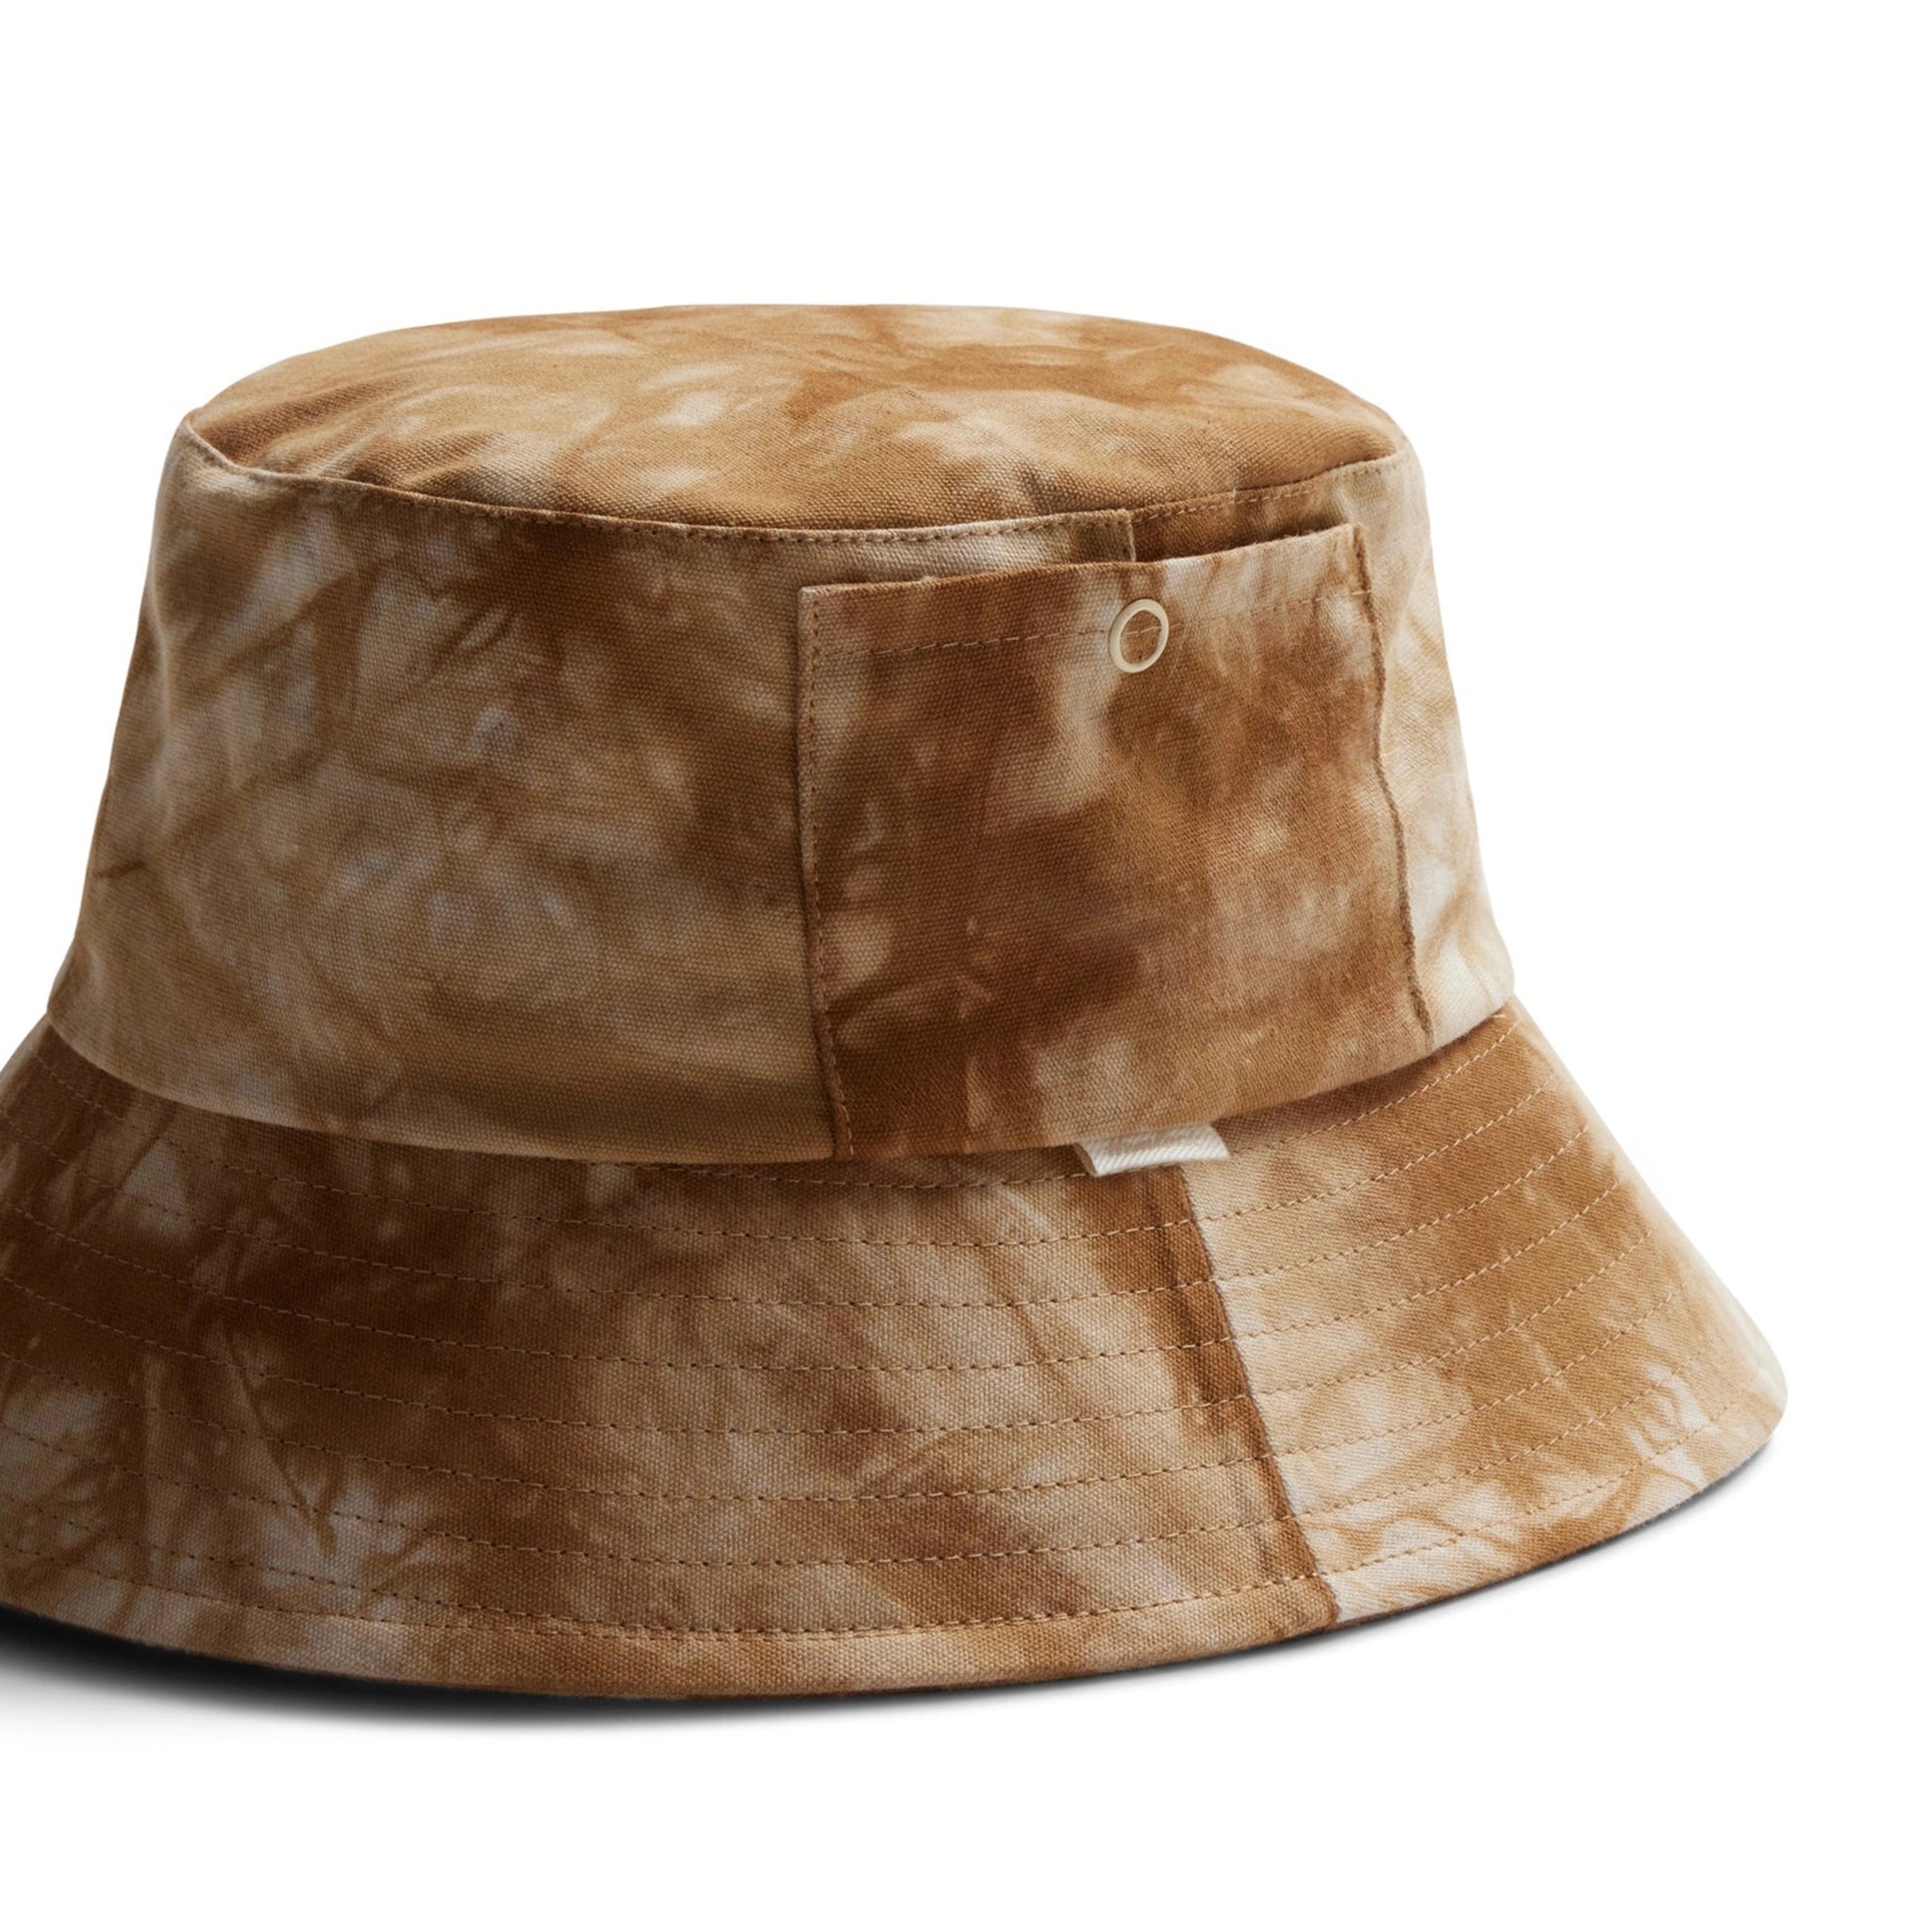 An ivory and tan tie dye bucket hat. 